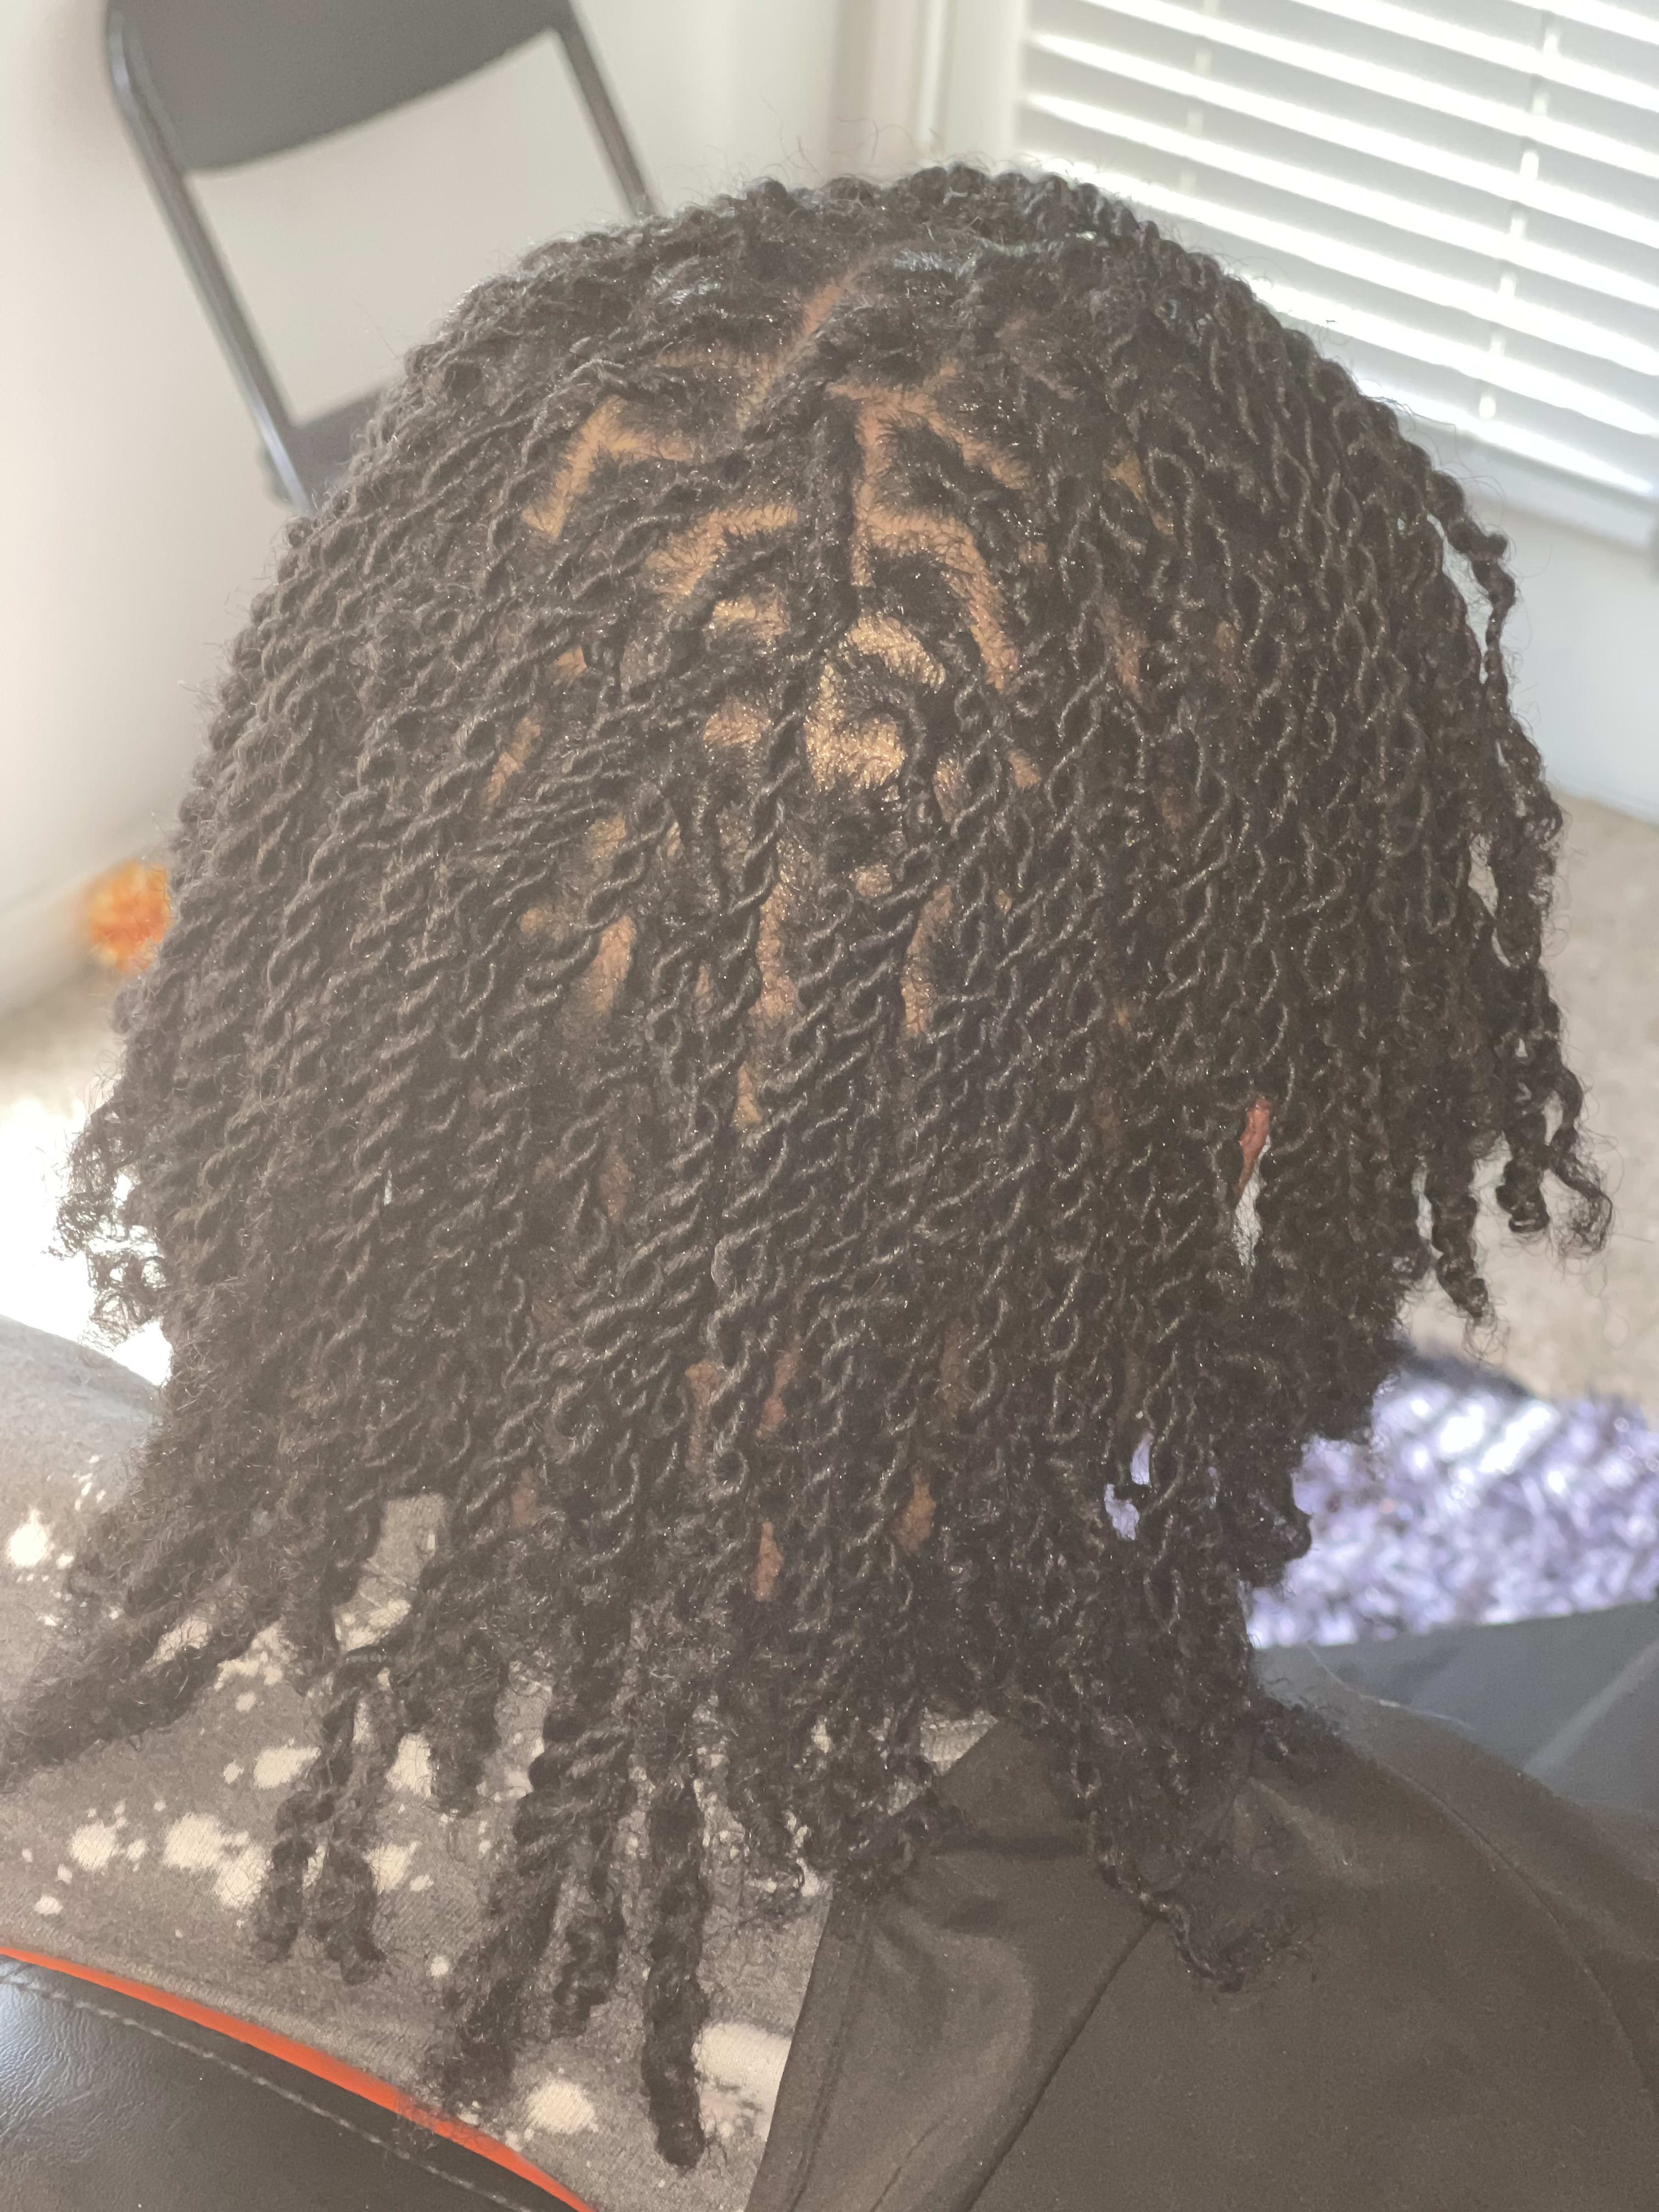 Loc Retwist WITHOUT Palm Rolling  How to Retwist Your Own Locs! 